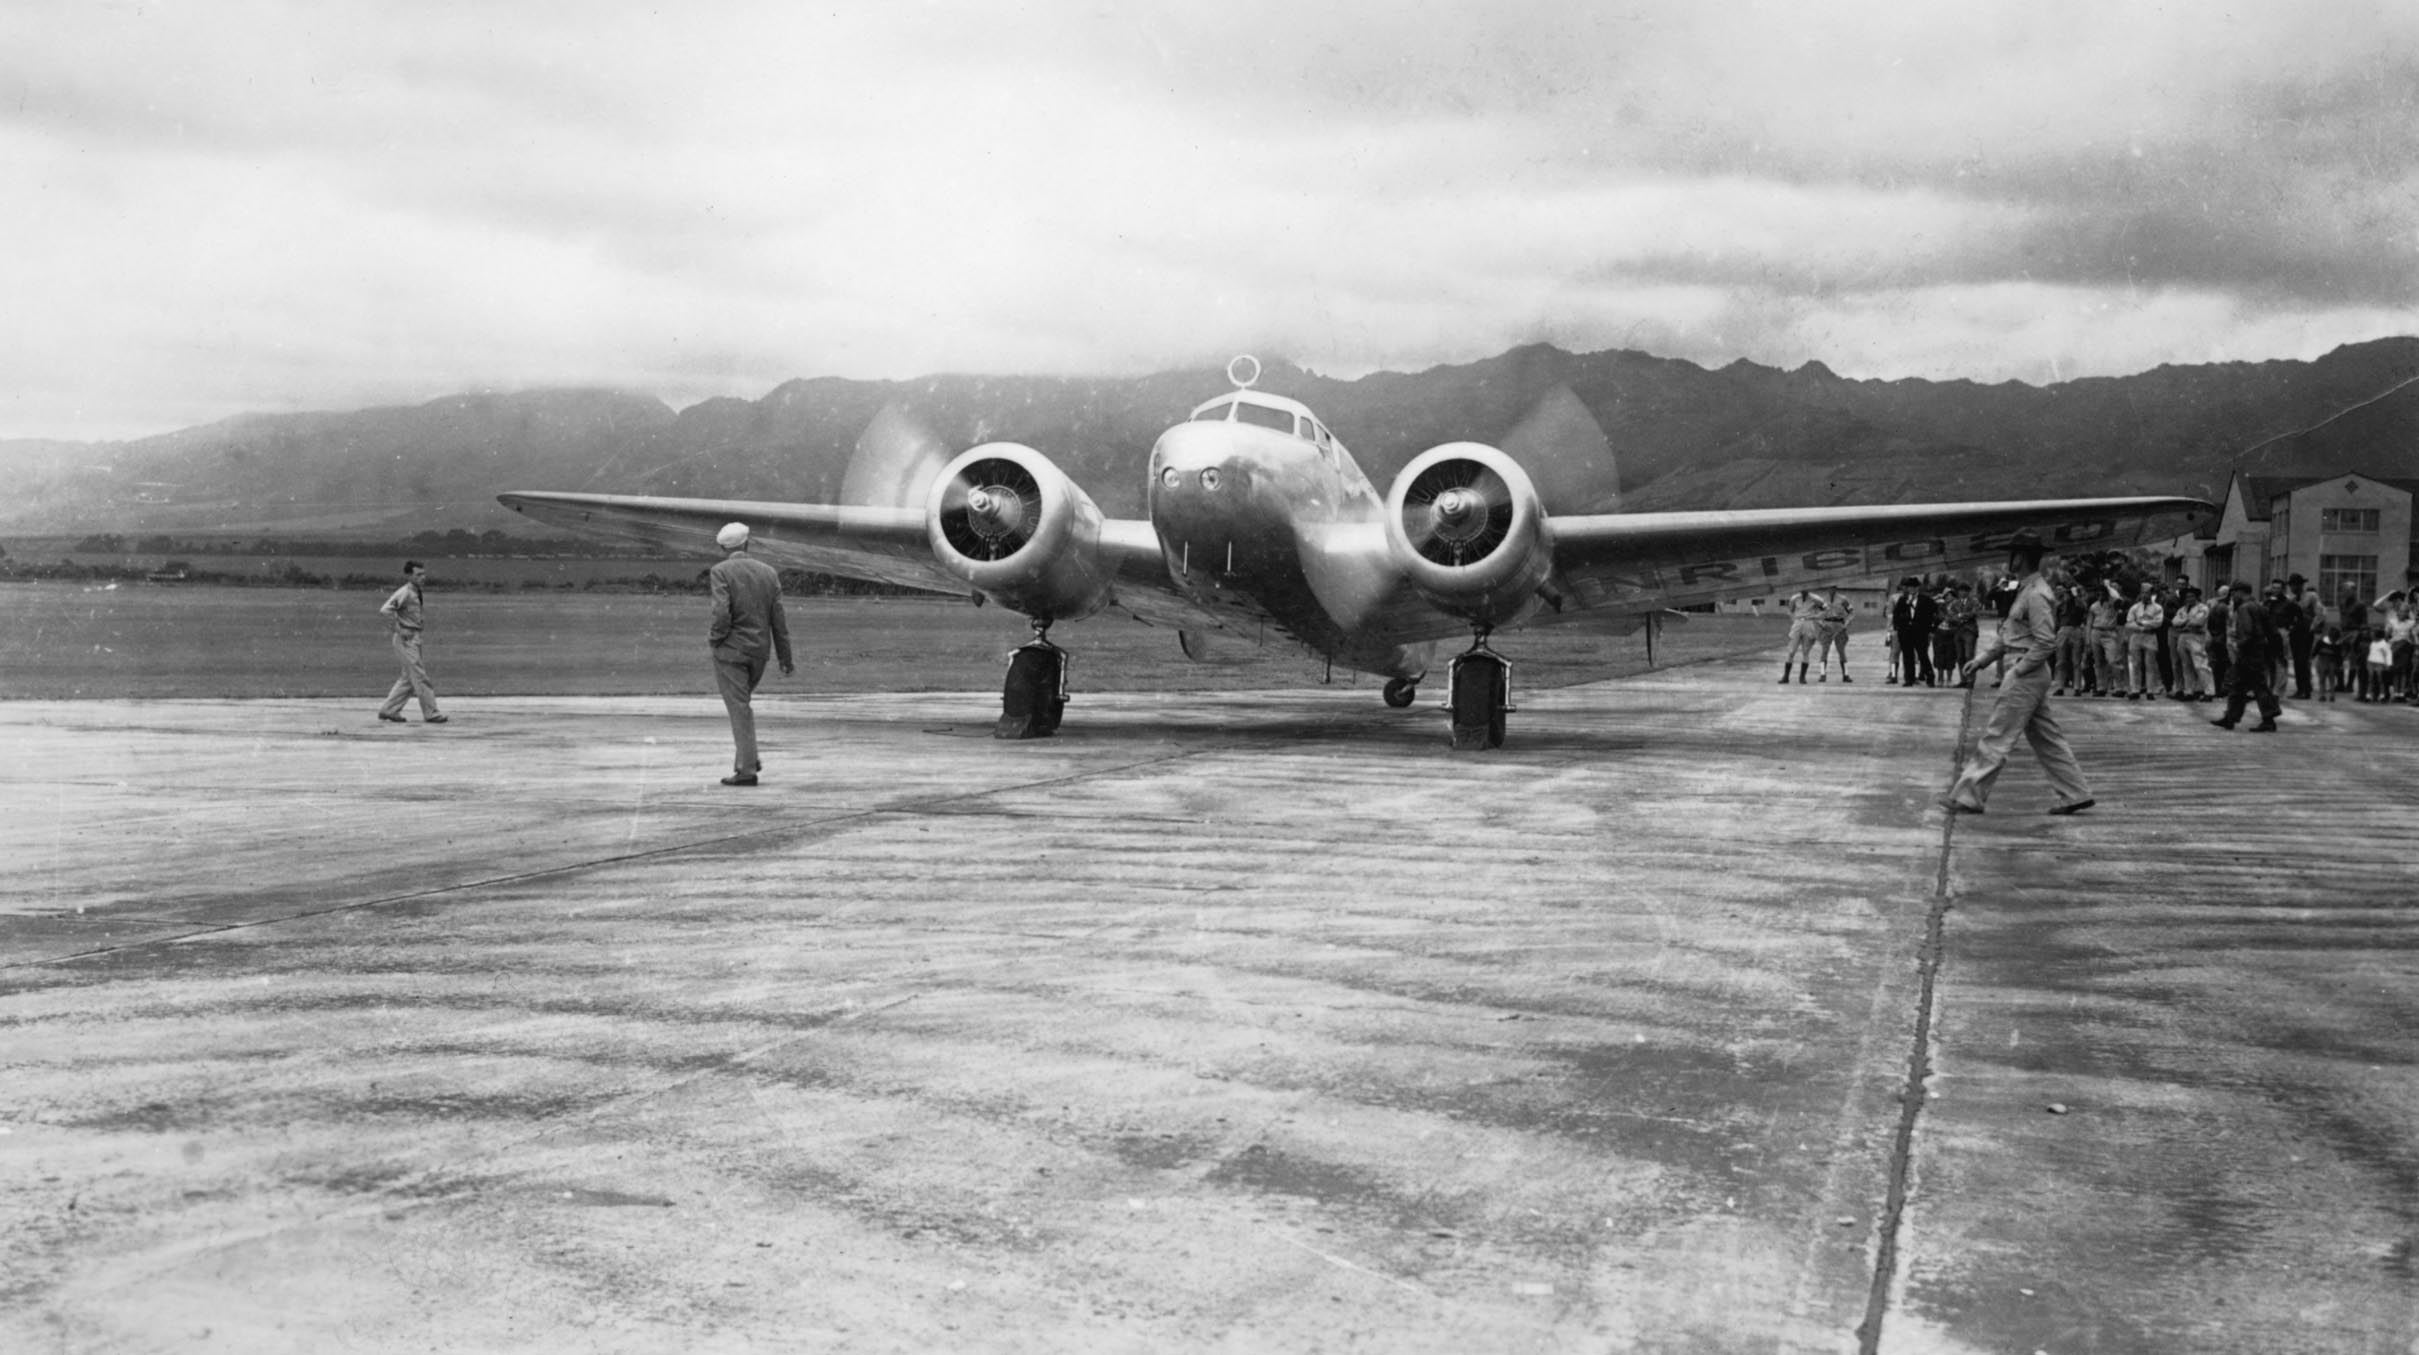 Amelia Earhart's Lockheed Electra 10E Special, NR16020, with engines running at Wheeler Field, prior to repositioning to Luke Field, 19 March 1937. (Hawaii’s Aviation History, http://hawaii.gov/hawaiiaviation )